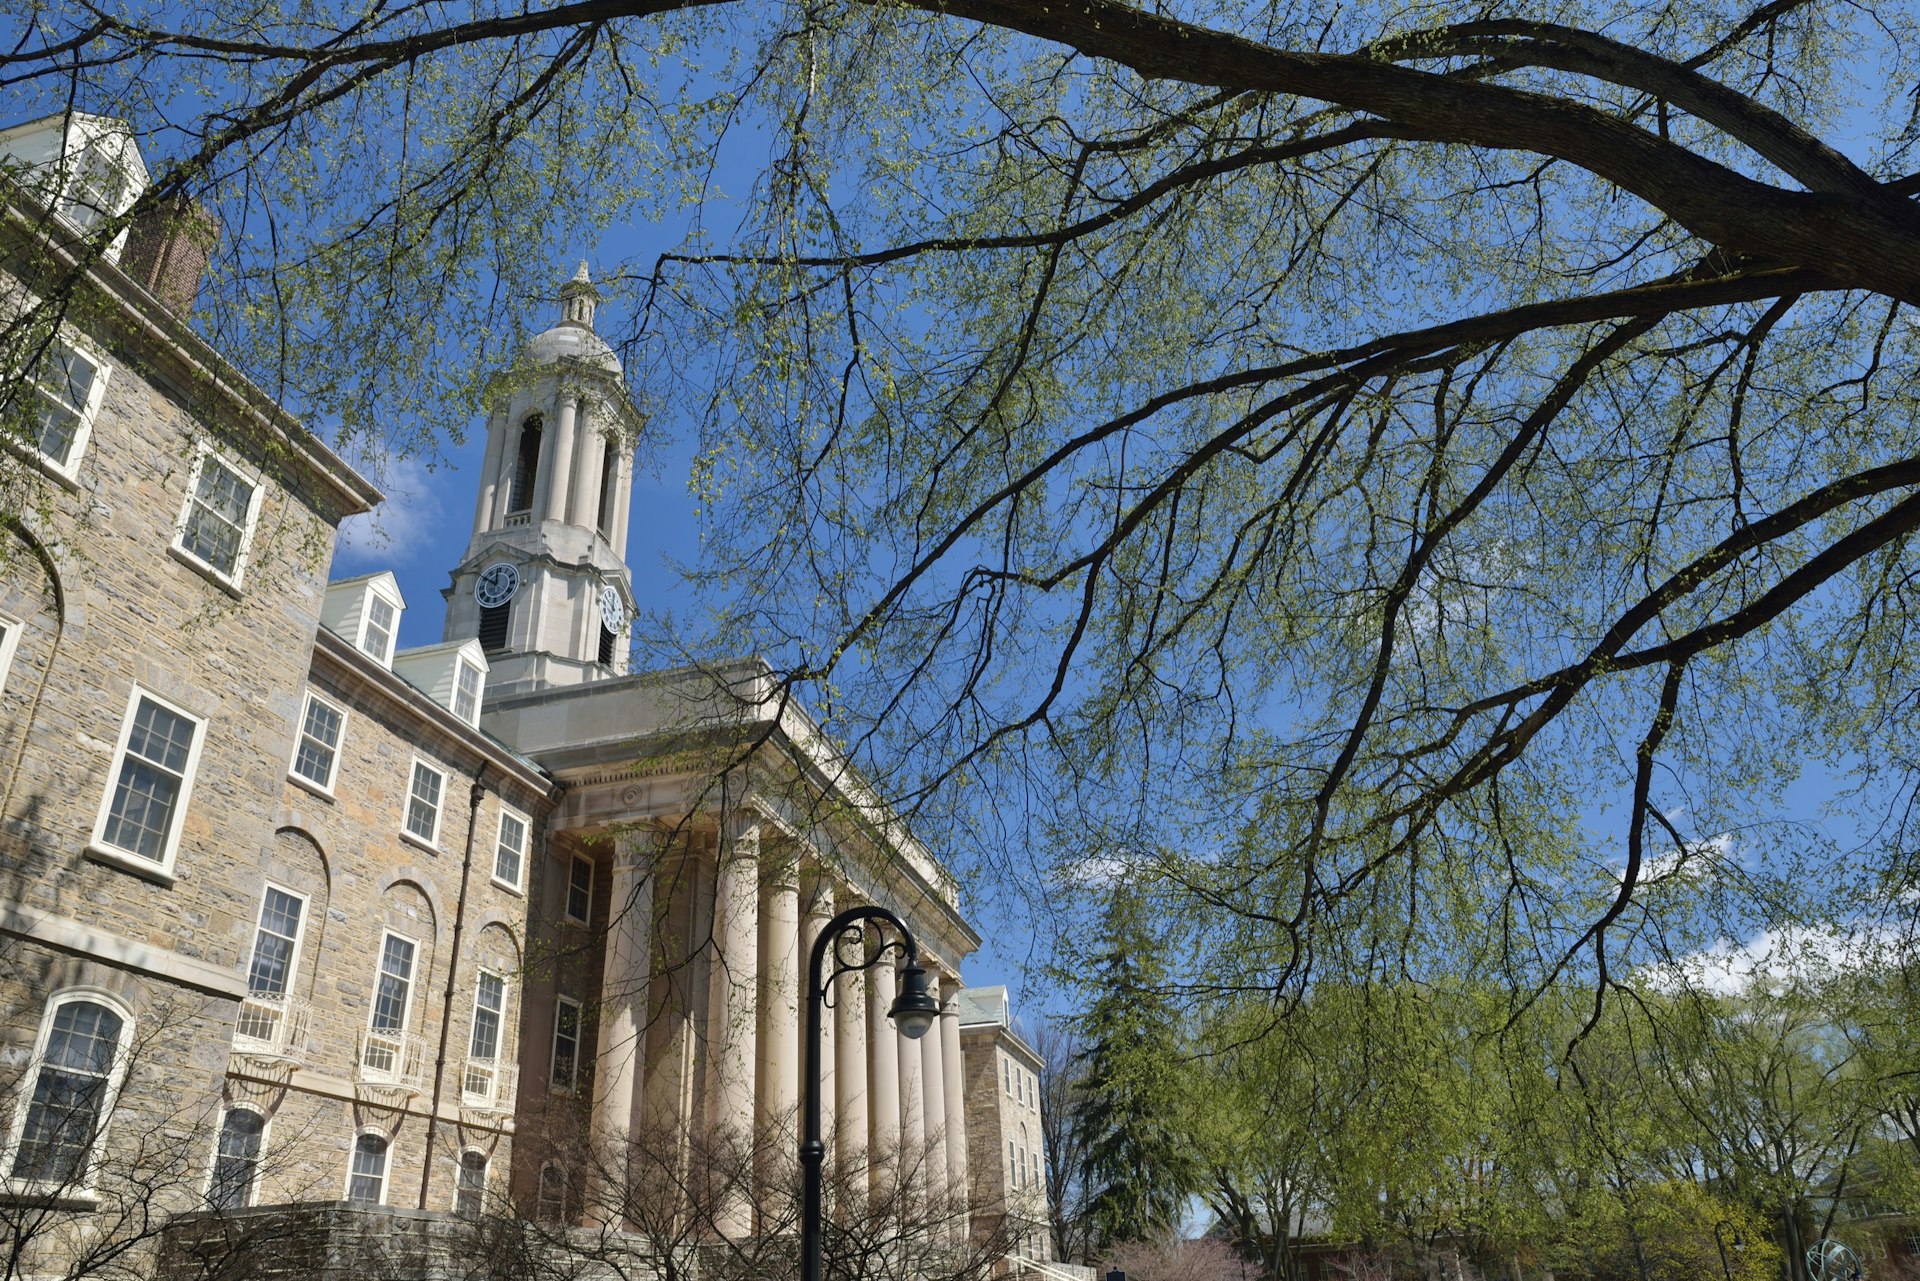 Old Main building in the main campus of Pennsylvania State University, State College, Pennsylvania, USA